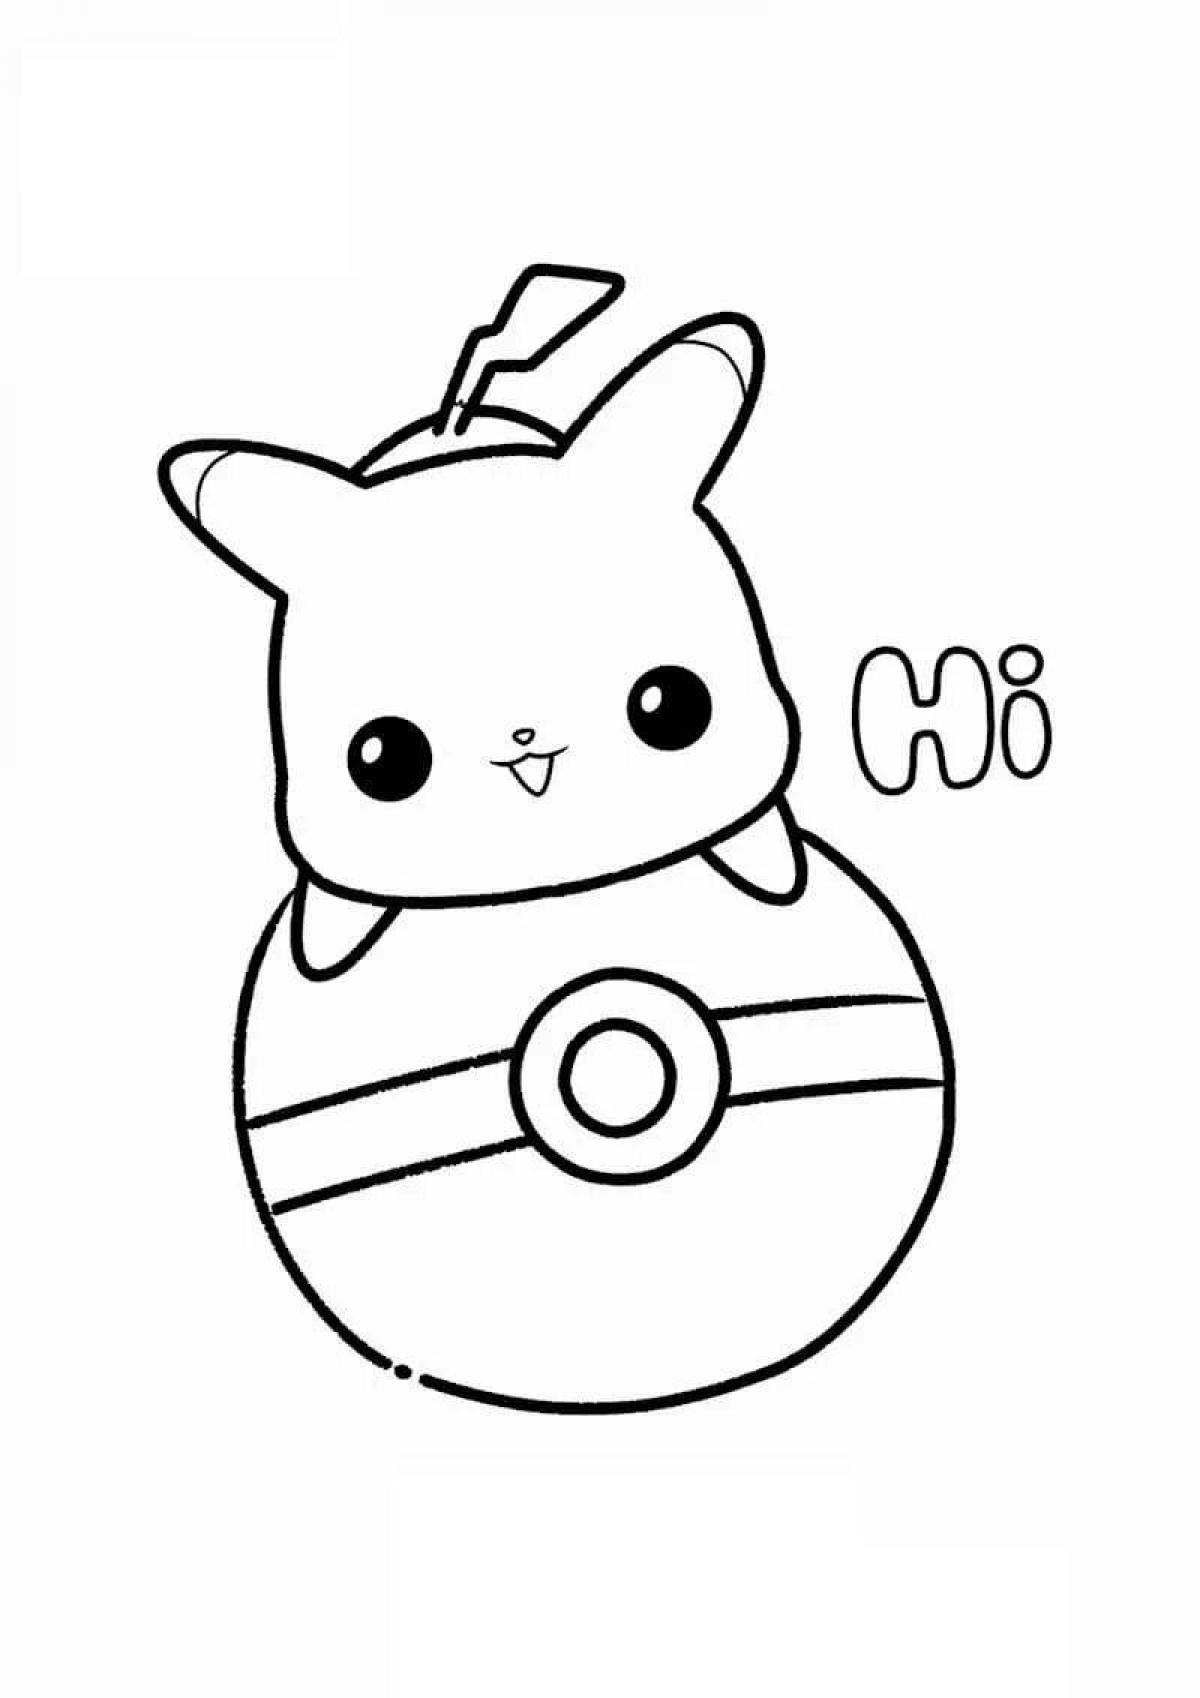 Happy pikachu coloring page